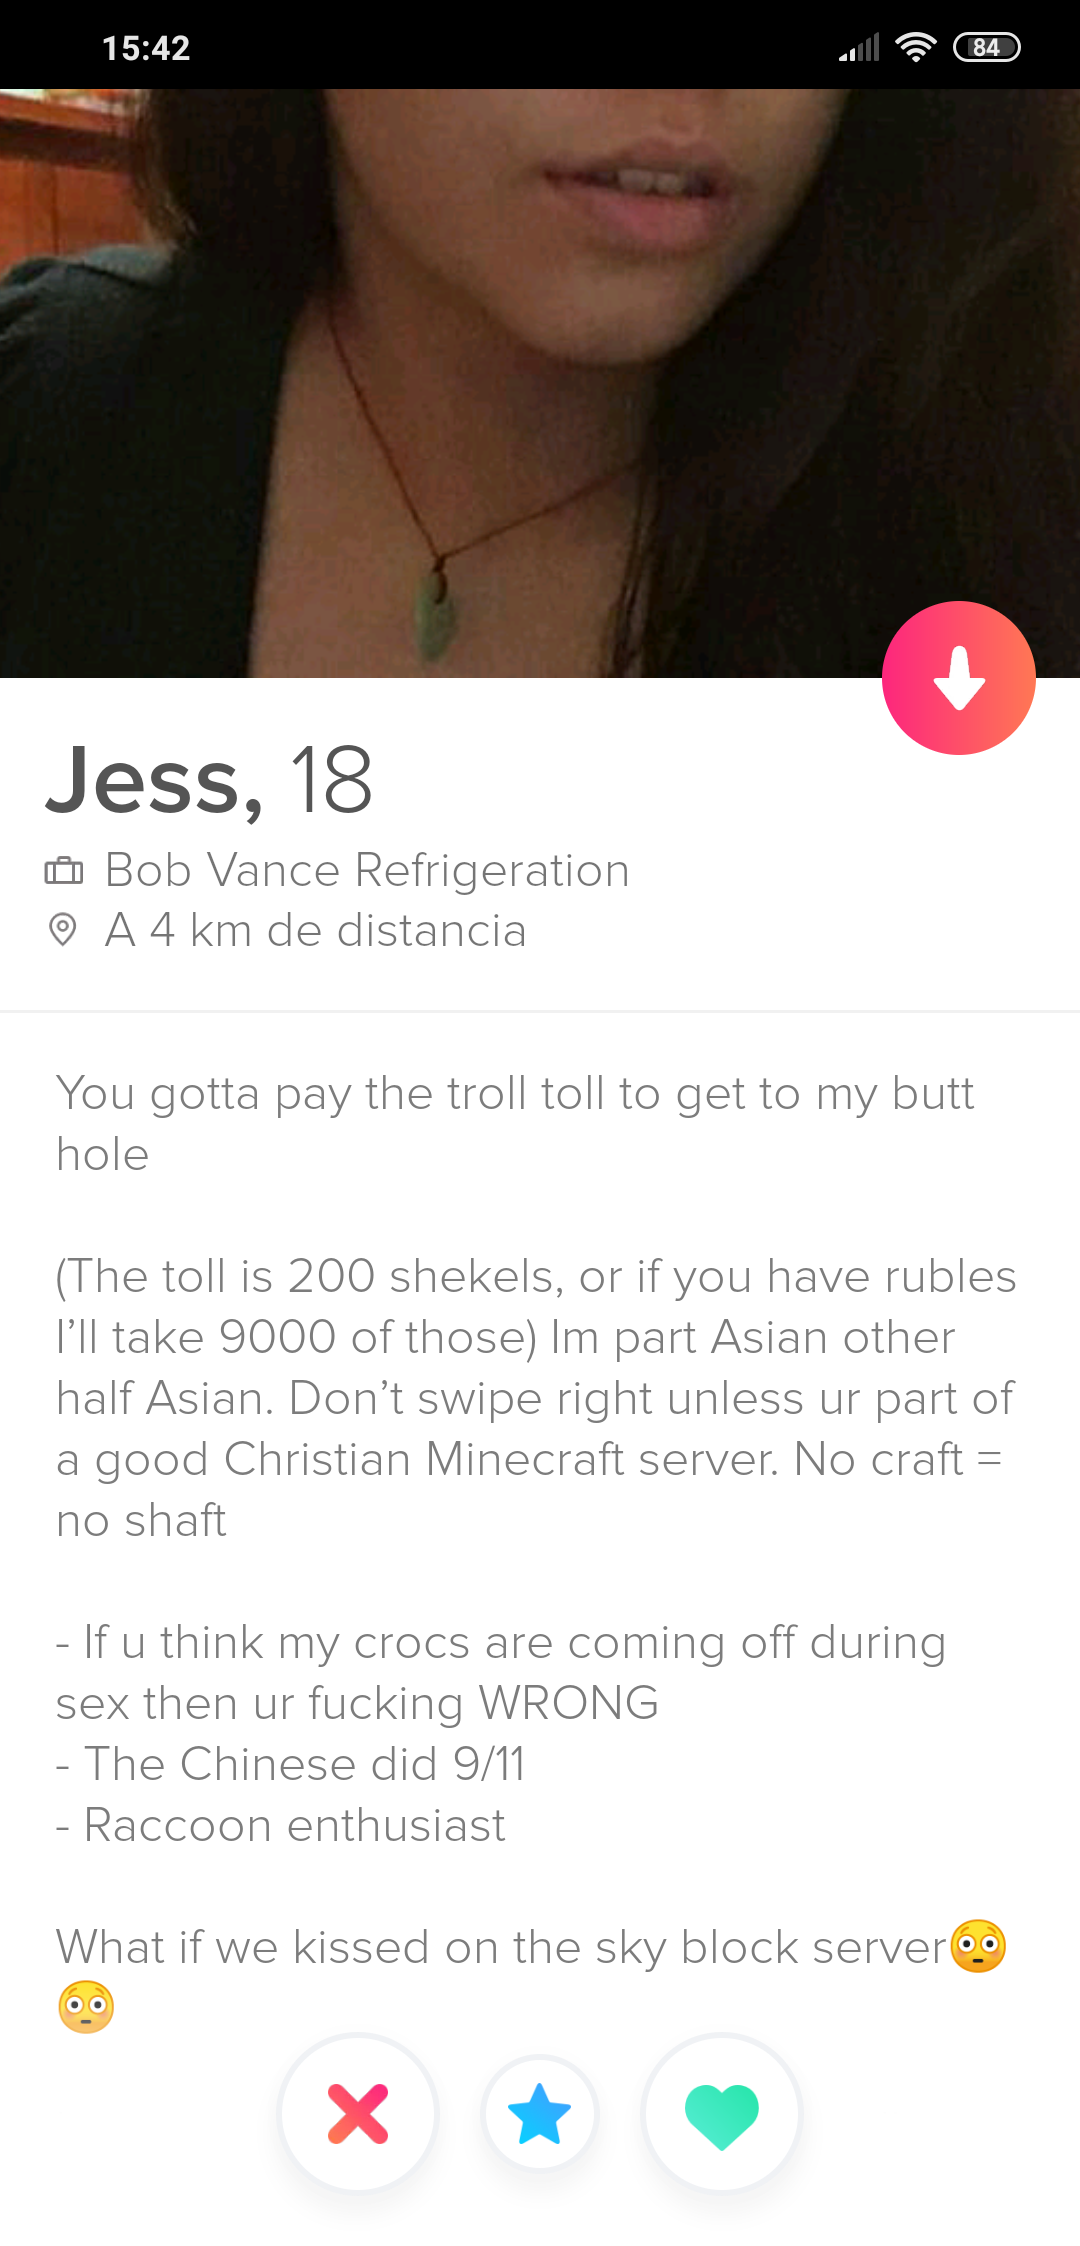 Funny tinder profile - lip - Sch Jess, 18 Bab Vance Refrigeration @ A4 km de distancia You gotta pay the troll toll to get to my butt hole The toll is 200 shekels, or if you have rubles I'll take 9000 of thoseIm part Asian other half Asian. Don't swipe ri